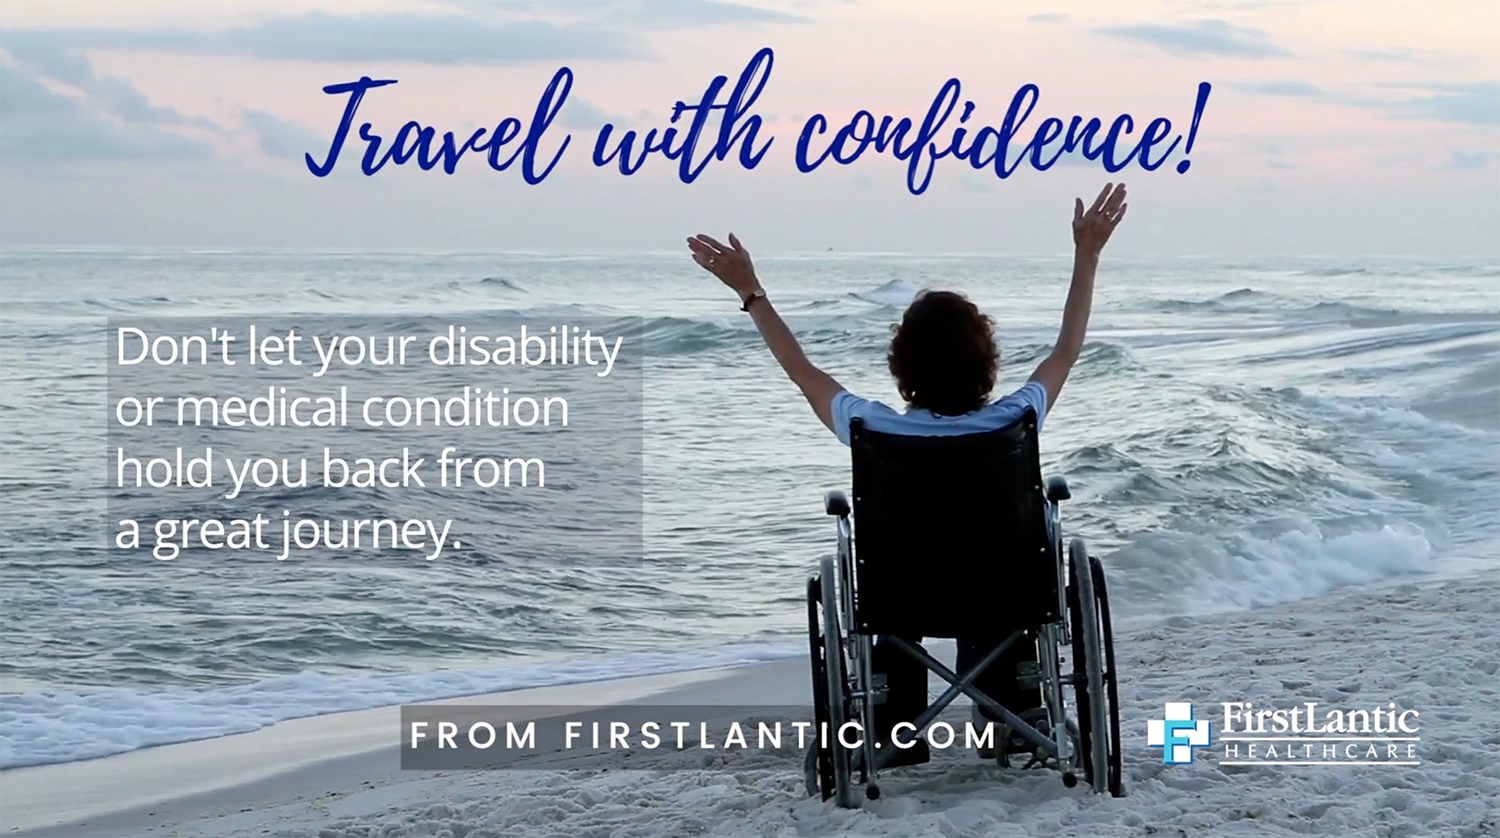 traveling with a disability or medical condition